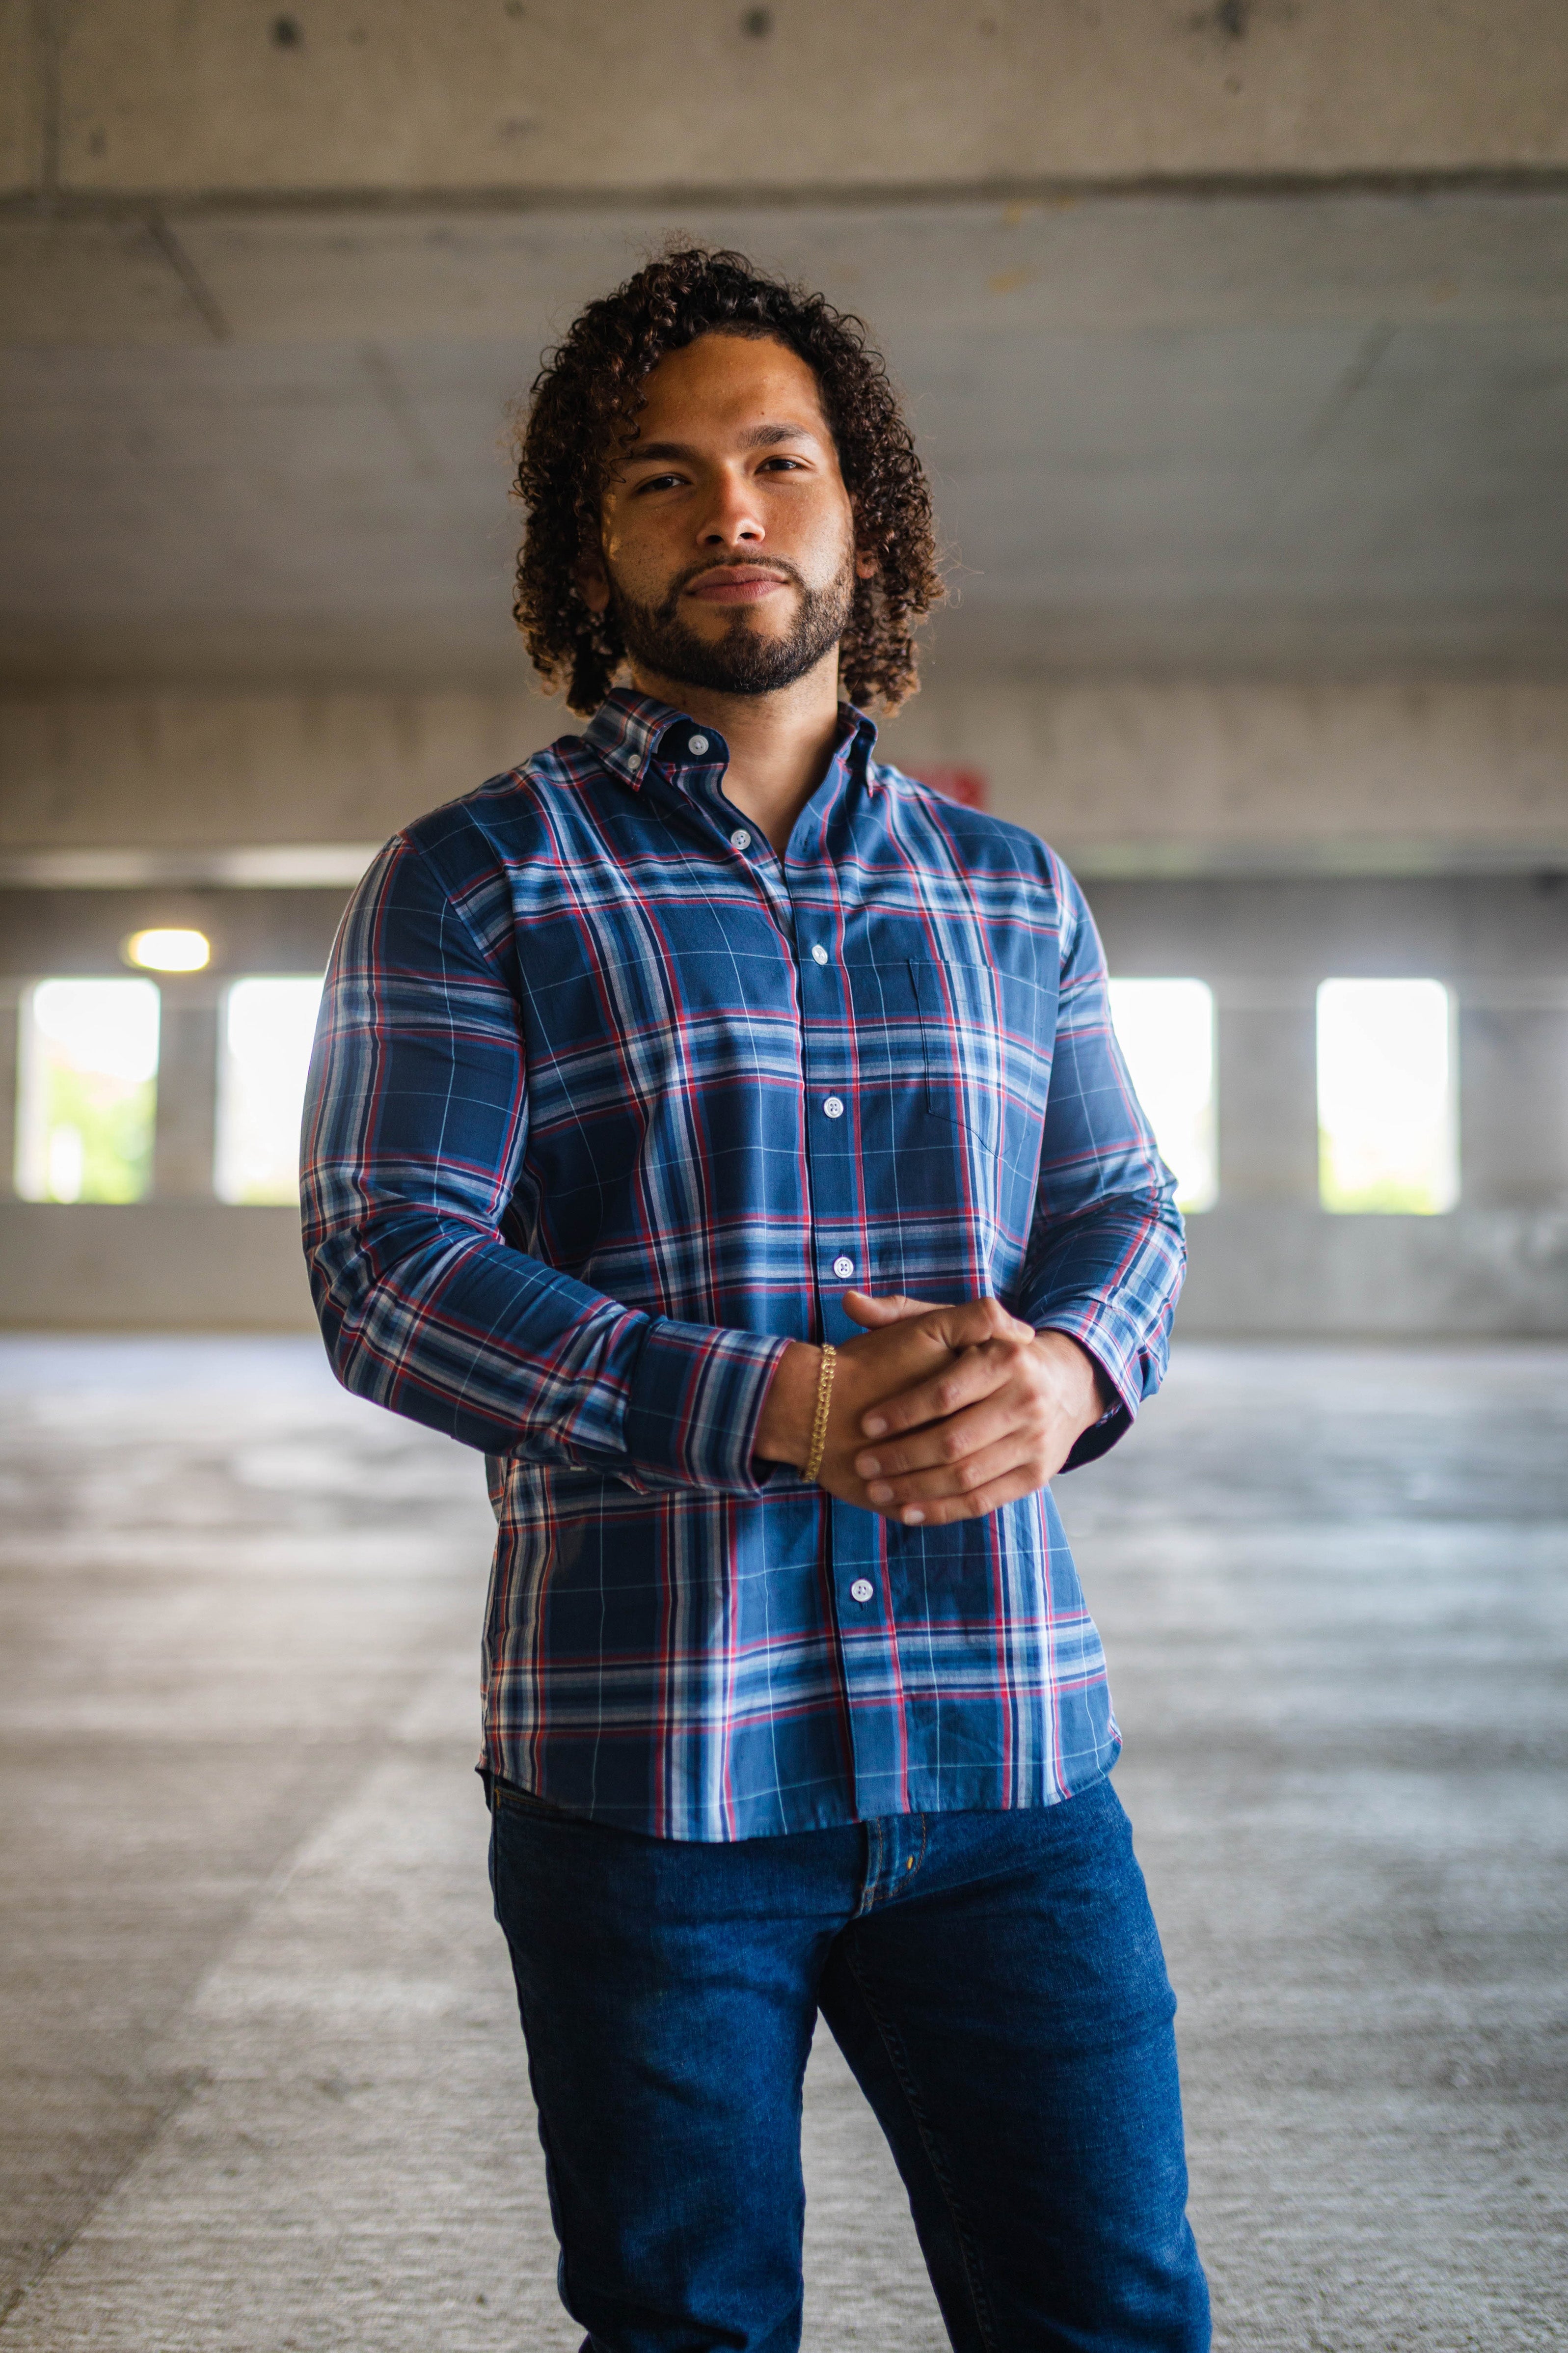 A man with curly hair and a beard is standing in a parking garage. He is wearing a blue and red plaid button-up shirt and dark blue jeans, with his hands clasped in front of him.